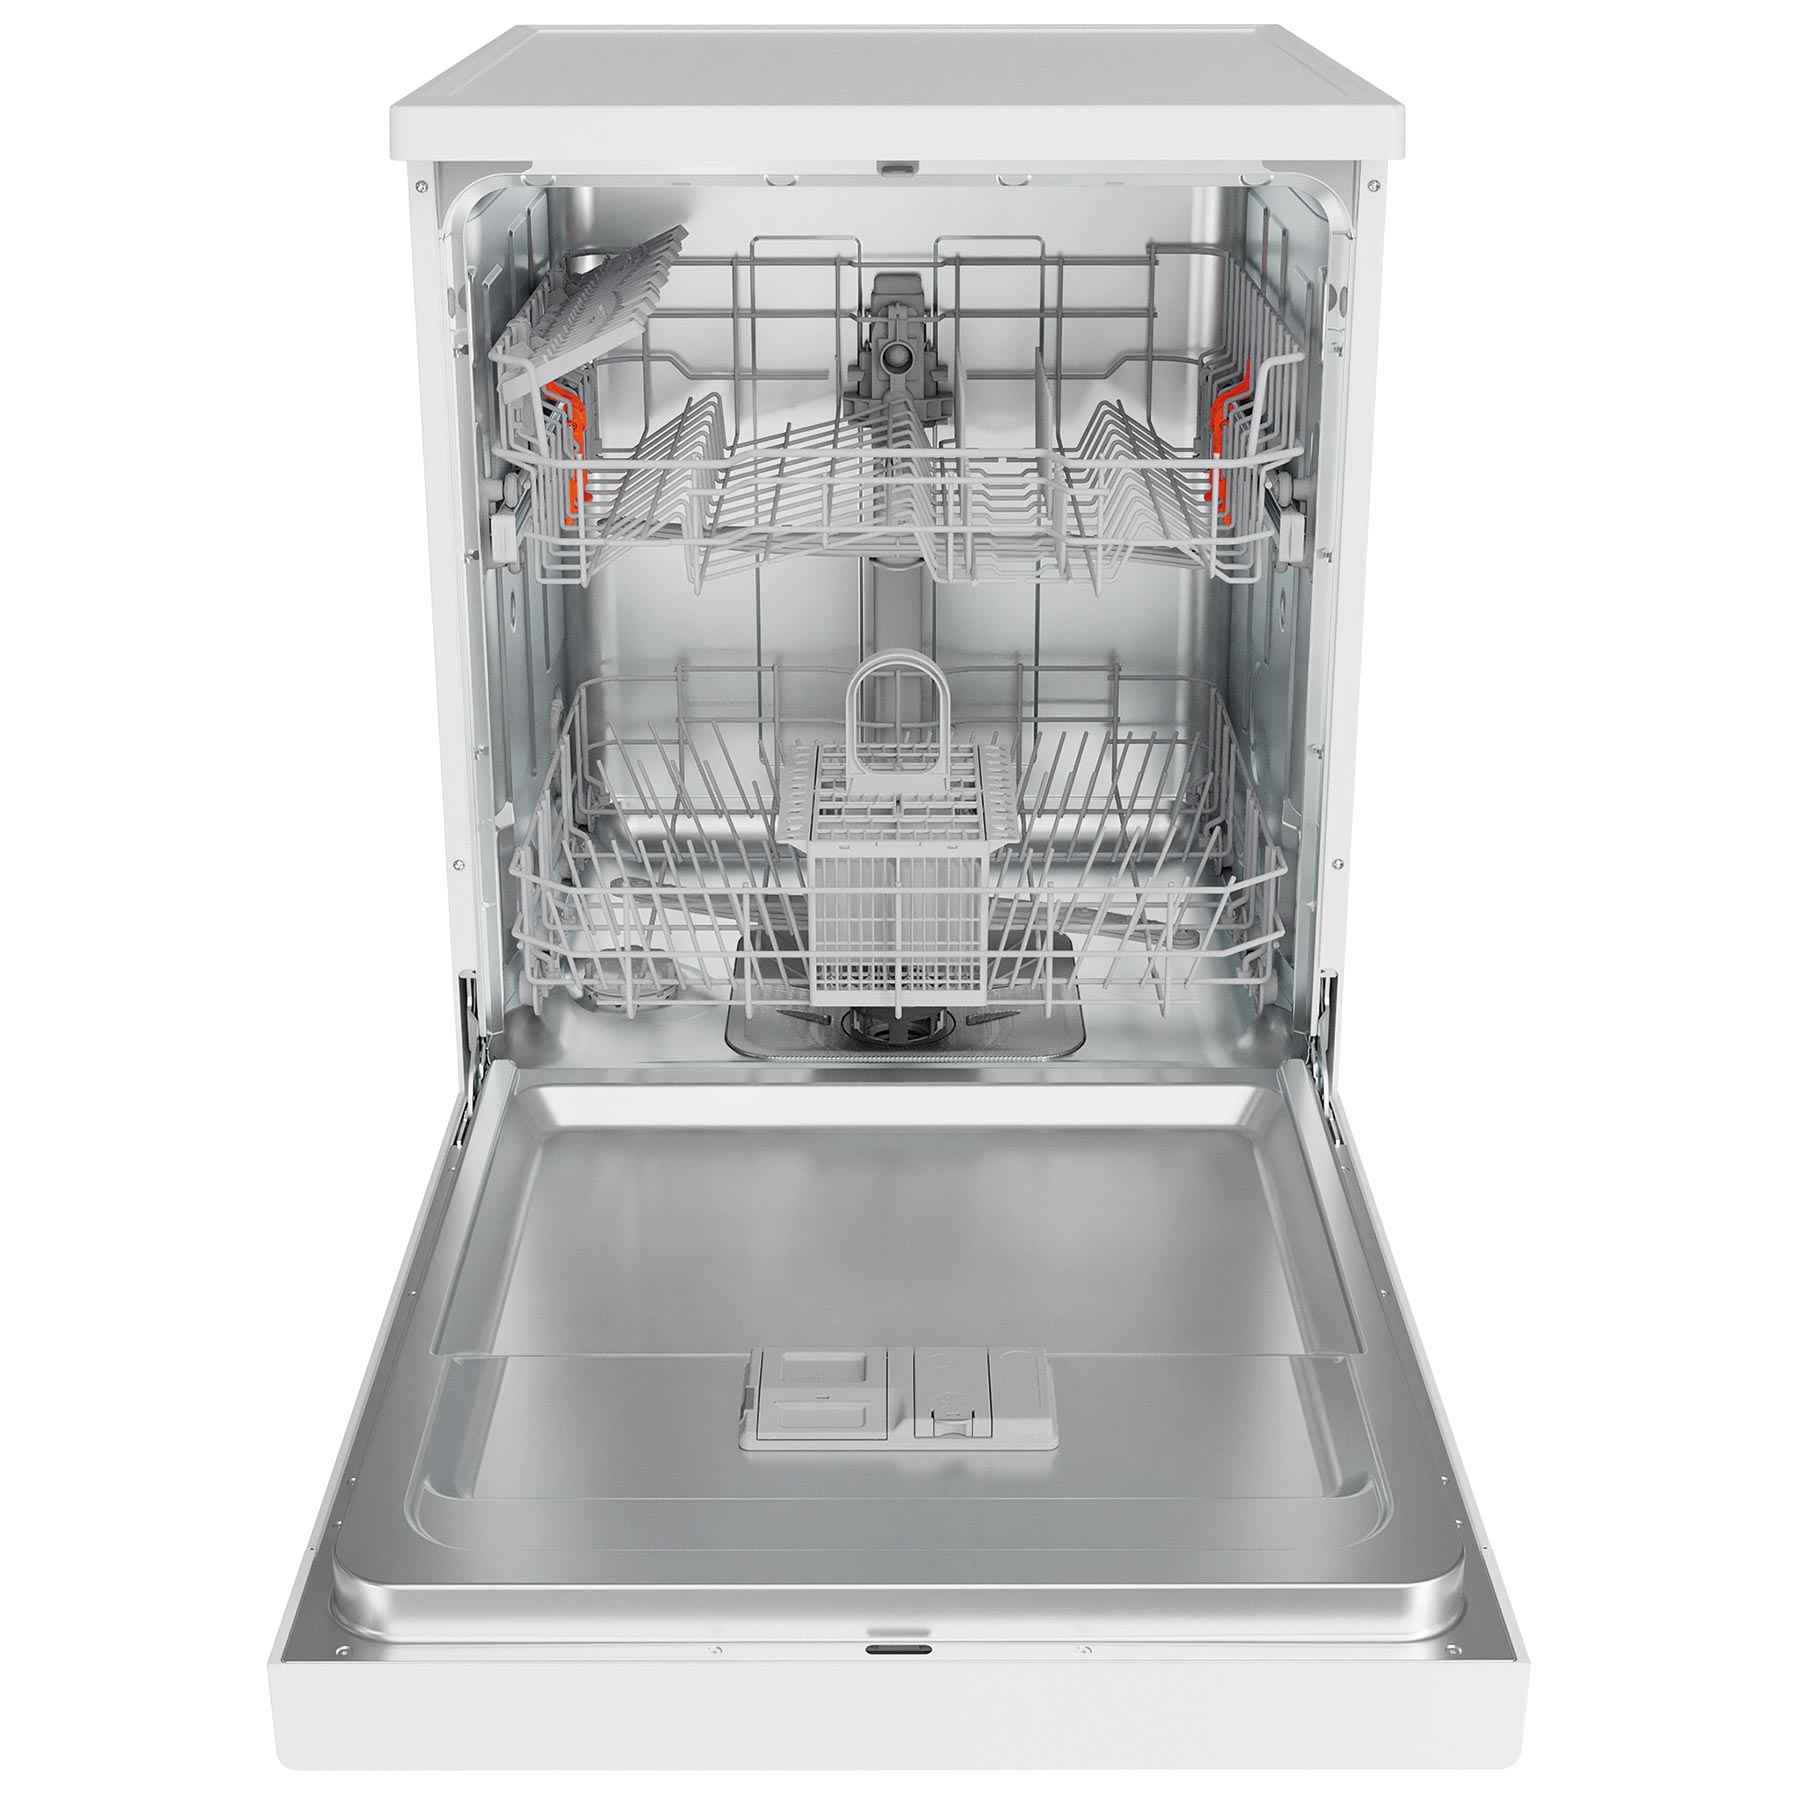 Image of Hotpoint H2FHL626 60cm Dishwasher in White 14 Place Setting E Rated